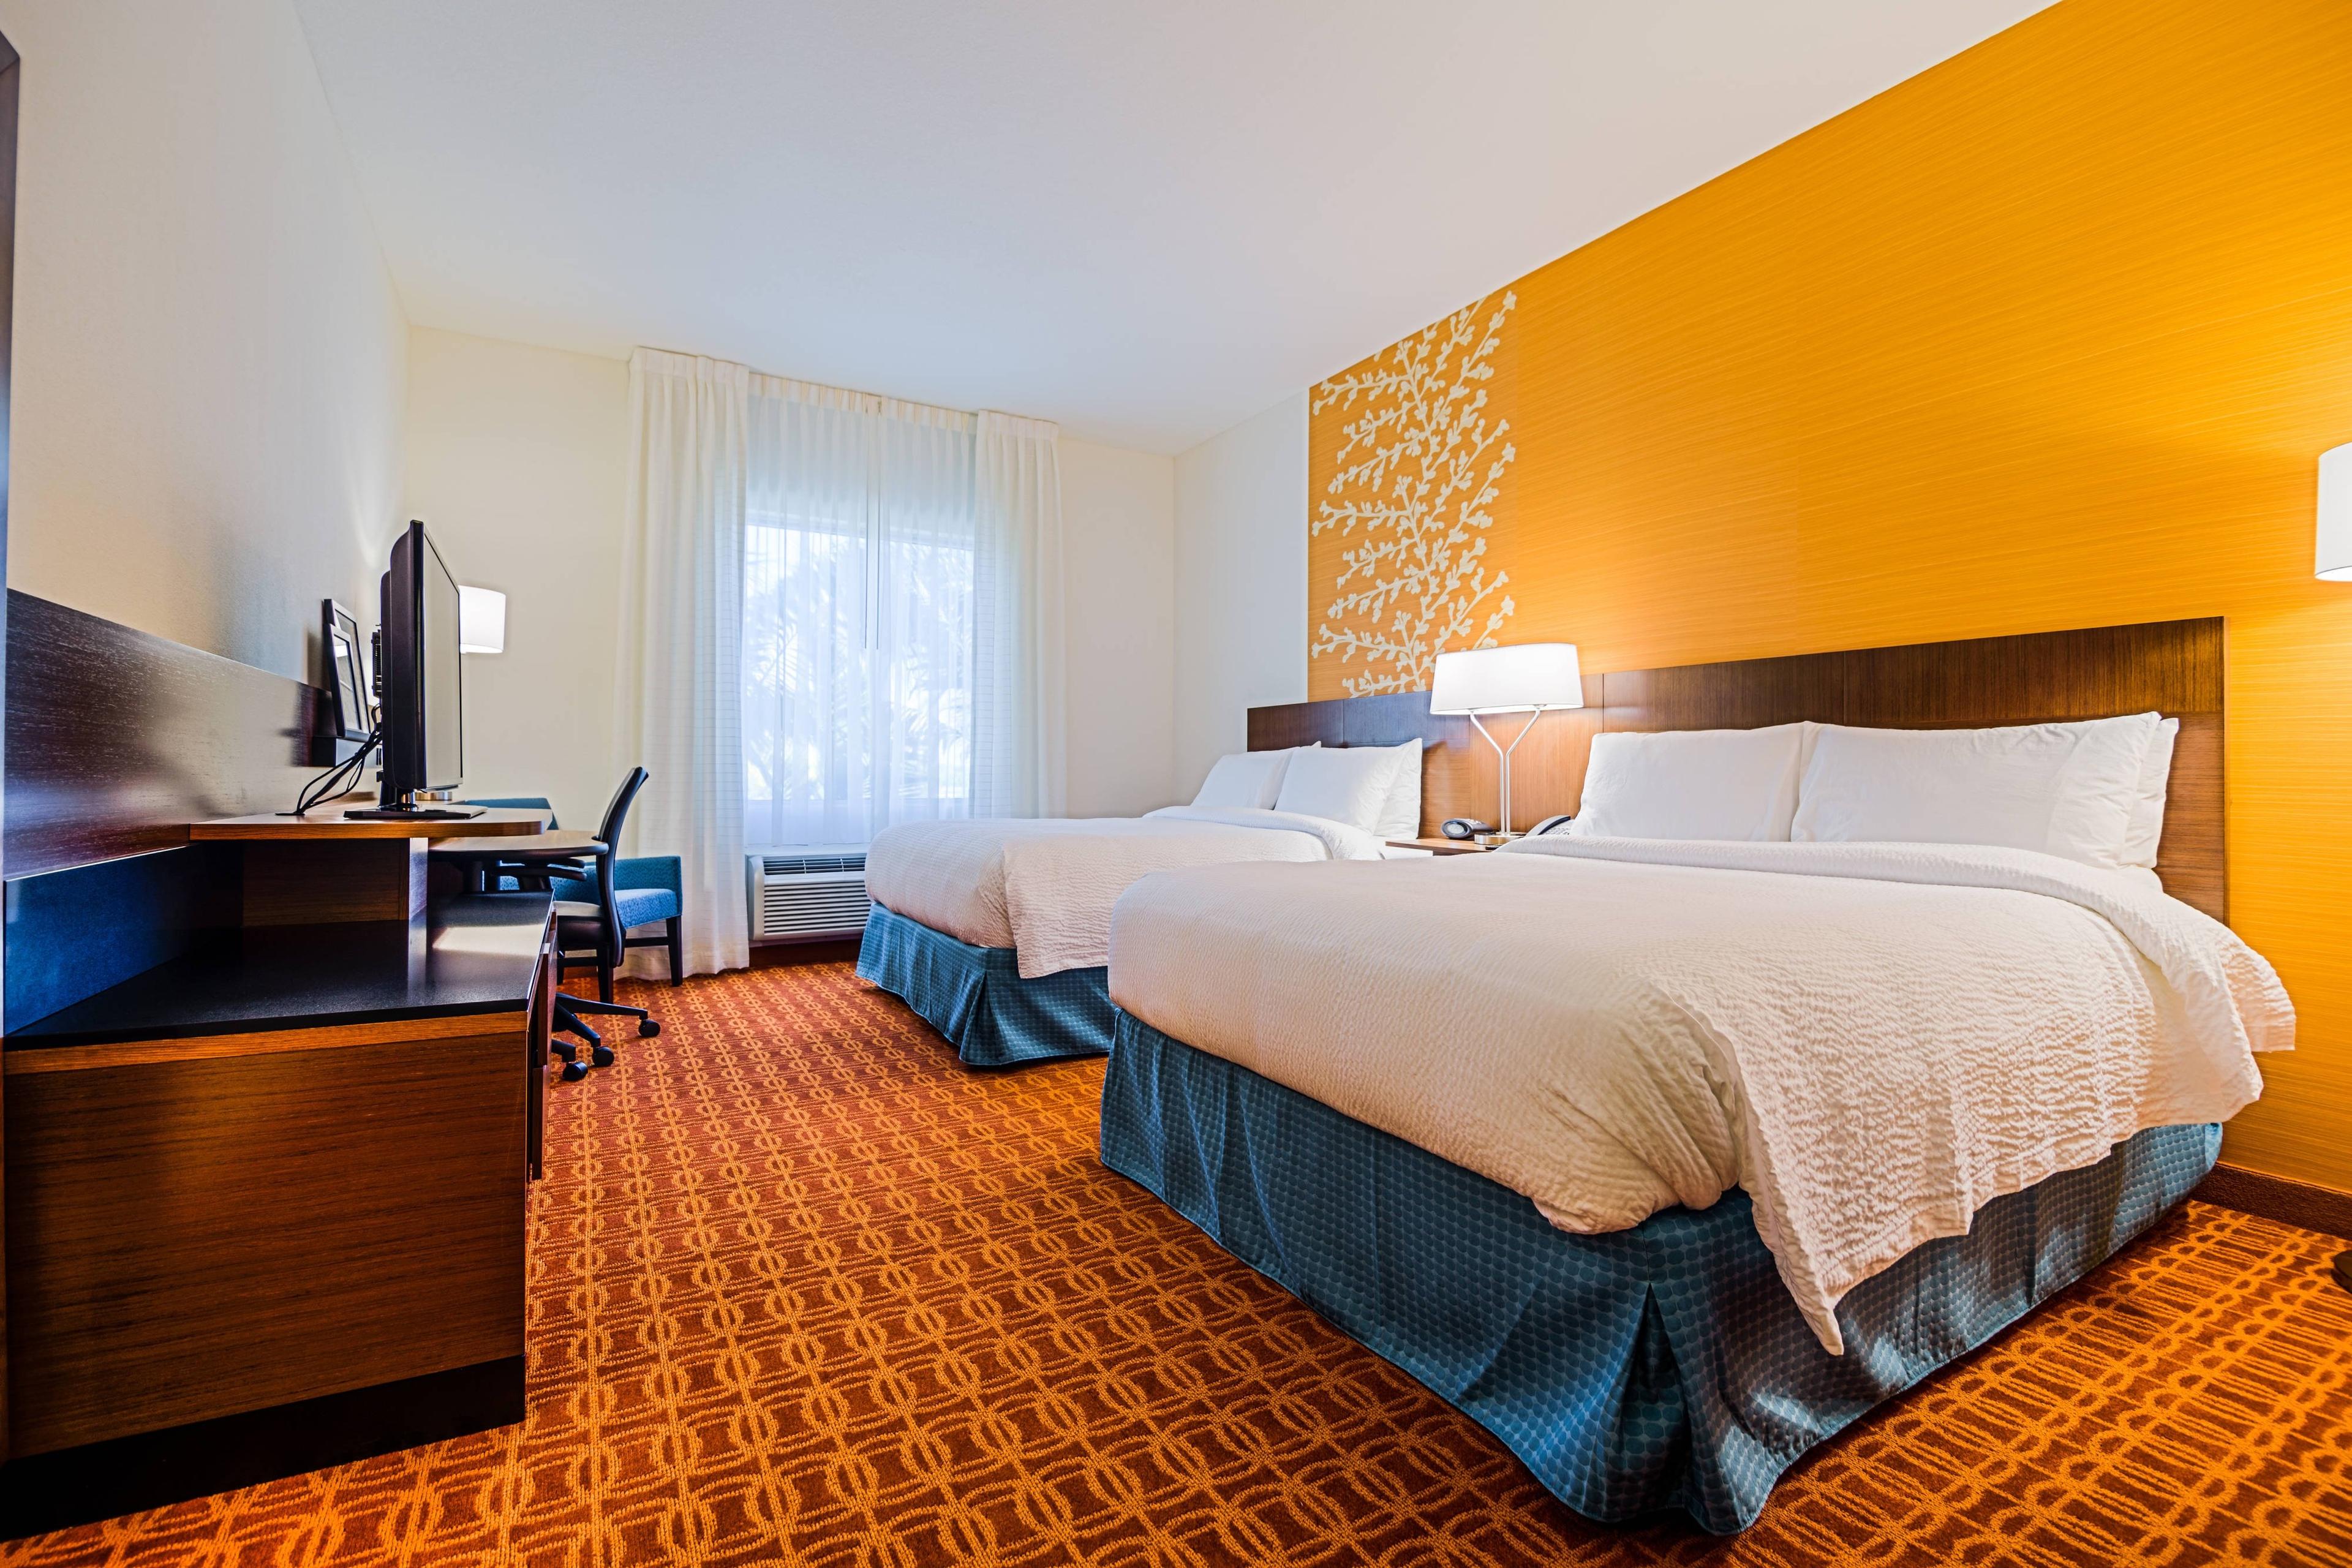 Our queen/queen hotel rooms provide a superior level of comfort with 12-foot ceilings, flat-panel TVs, microwaves and mini-refrigerators, plus coffee and tea makers.